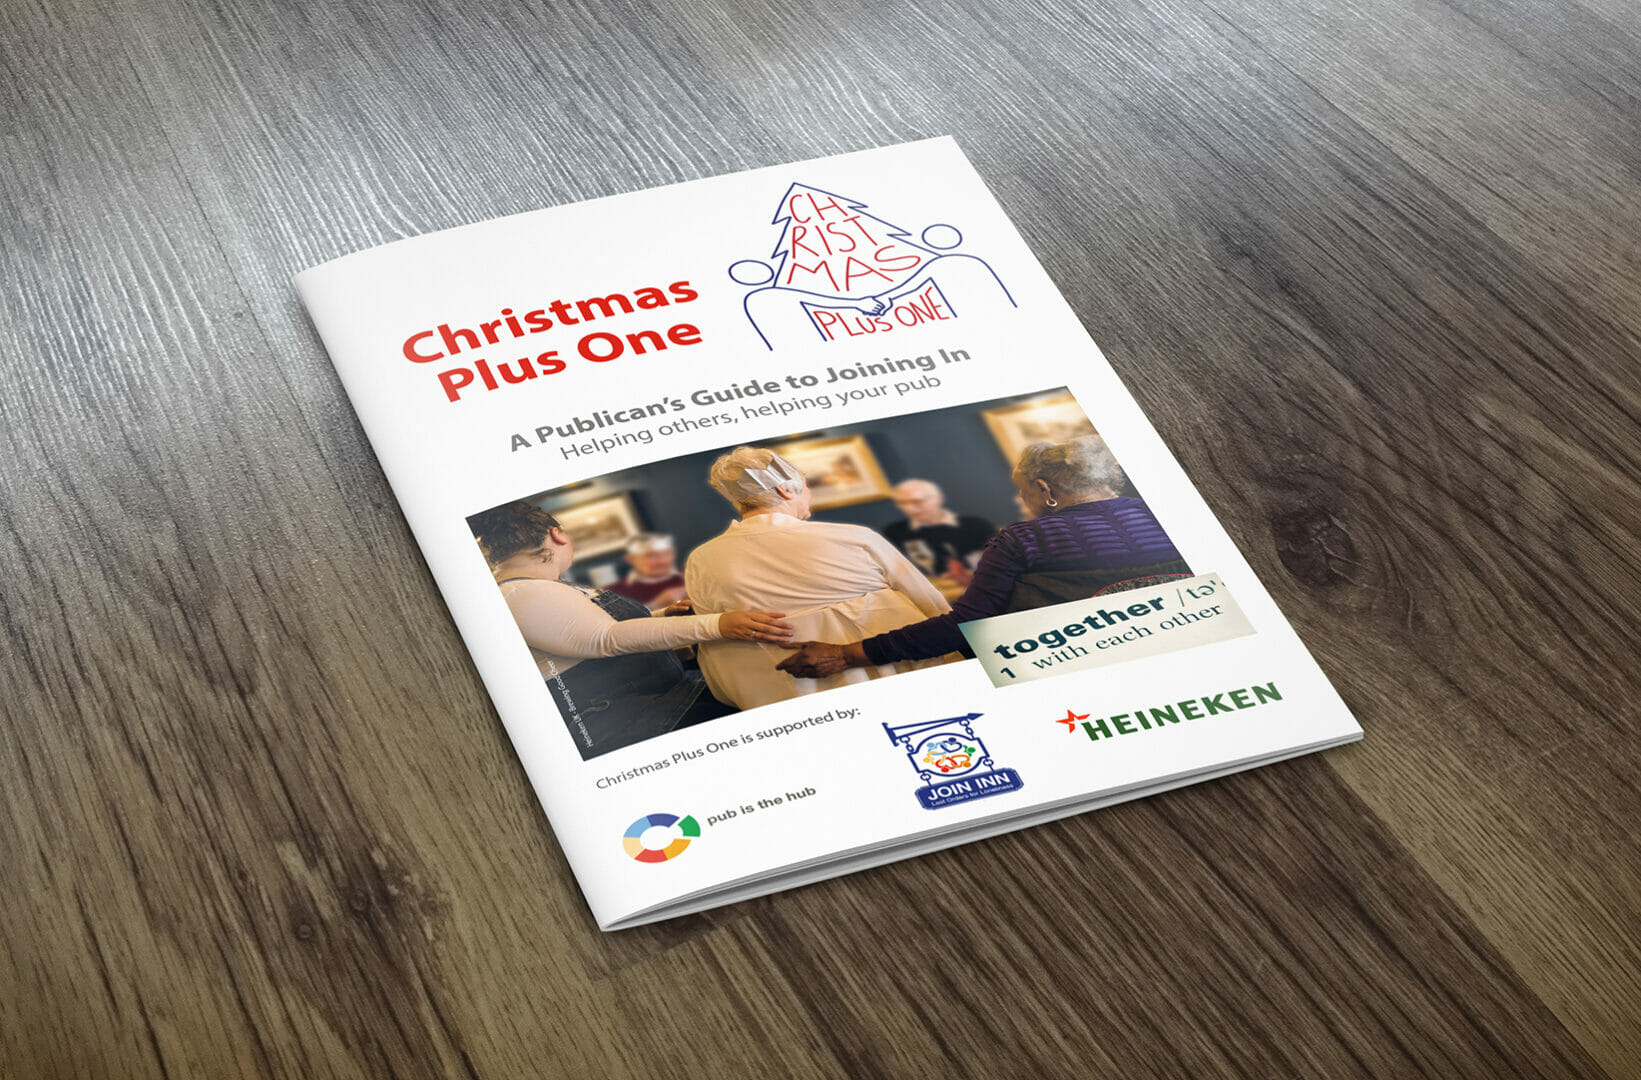 Christmas Together: publicans invited to join in new Christmas Plus One campaign created to help connect people and communities this December by using their pub as the festive hub #ChristmasTogether